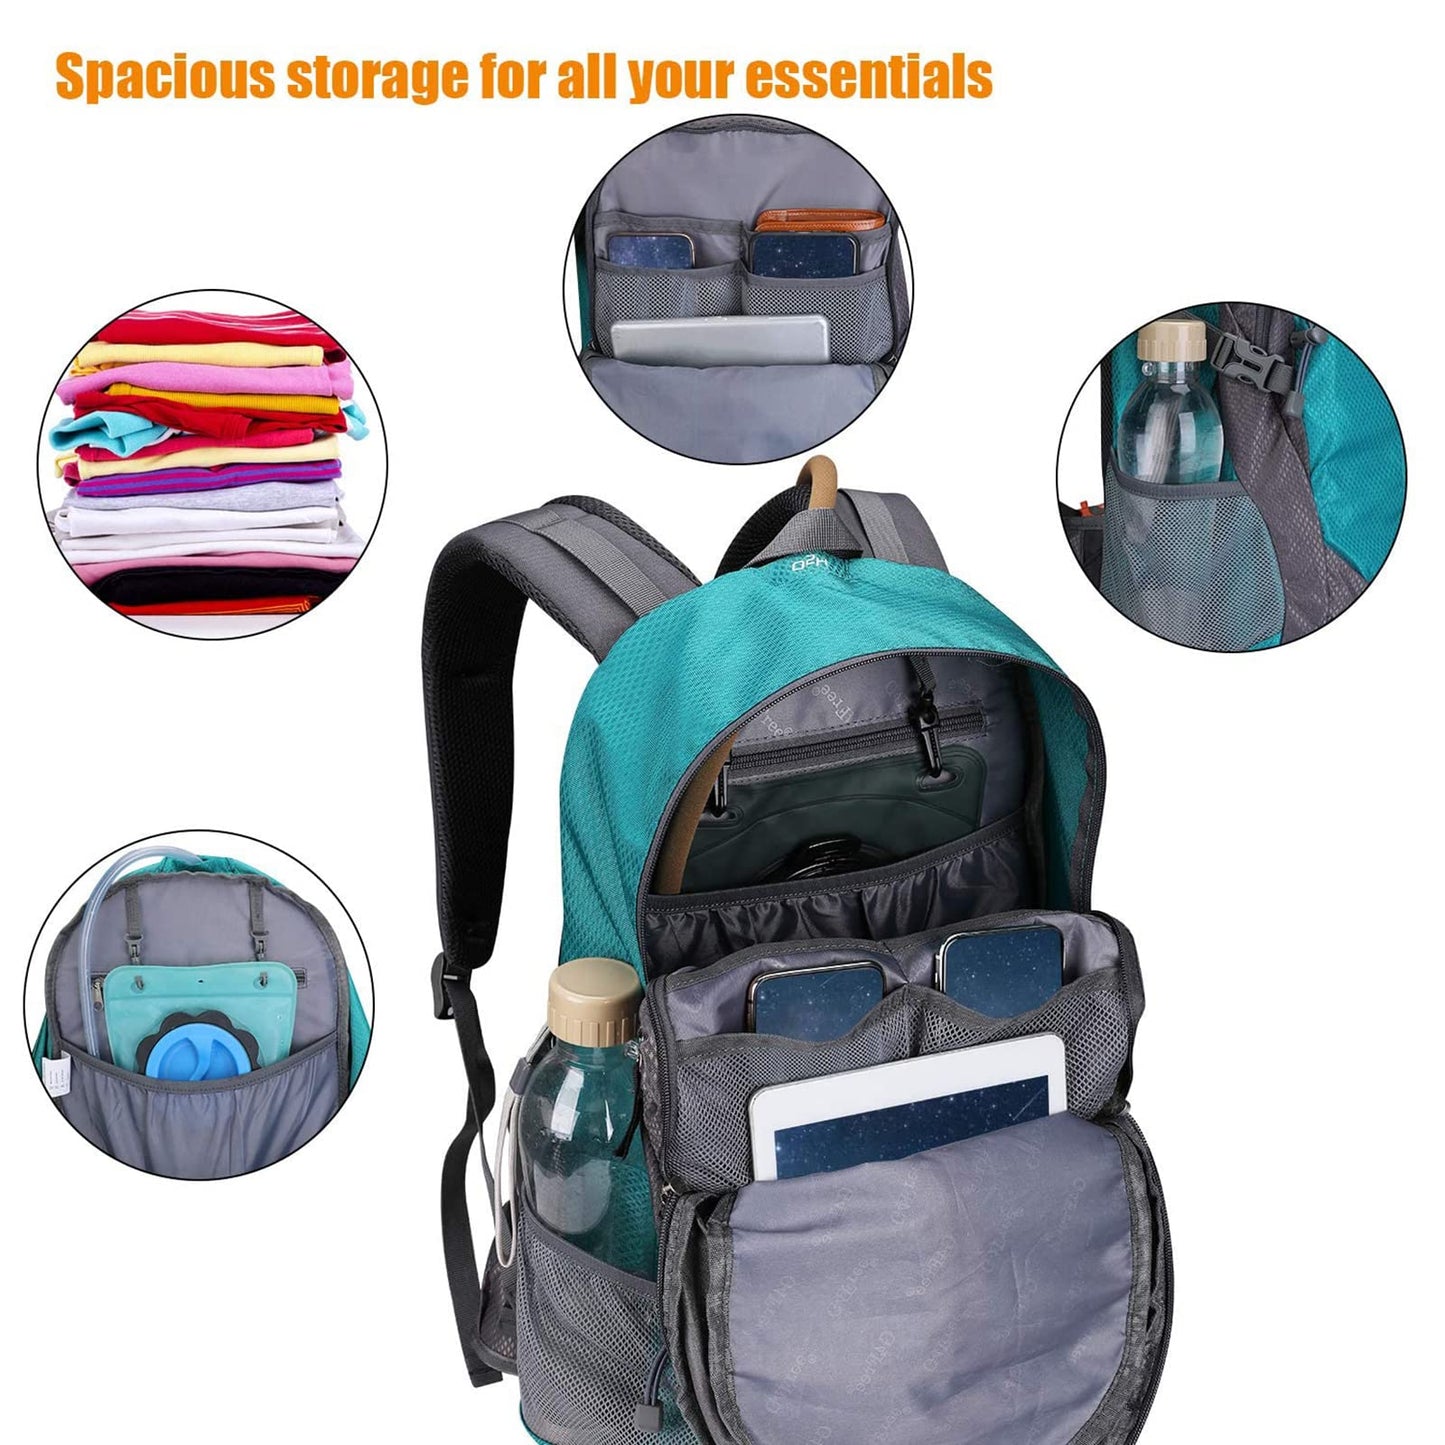 G4Free 35L Outdoor Sports Travel Daypack with Rain Cover